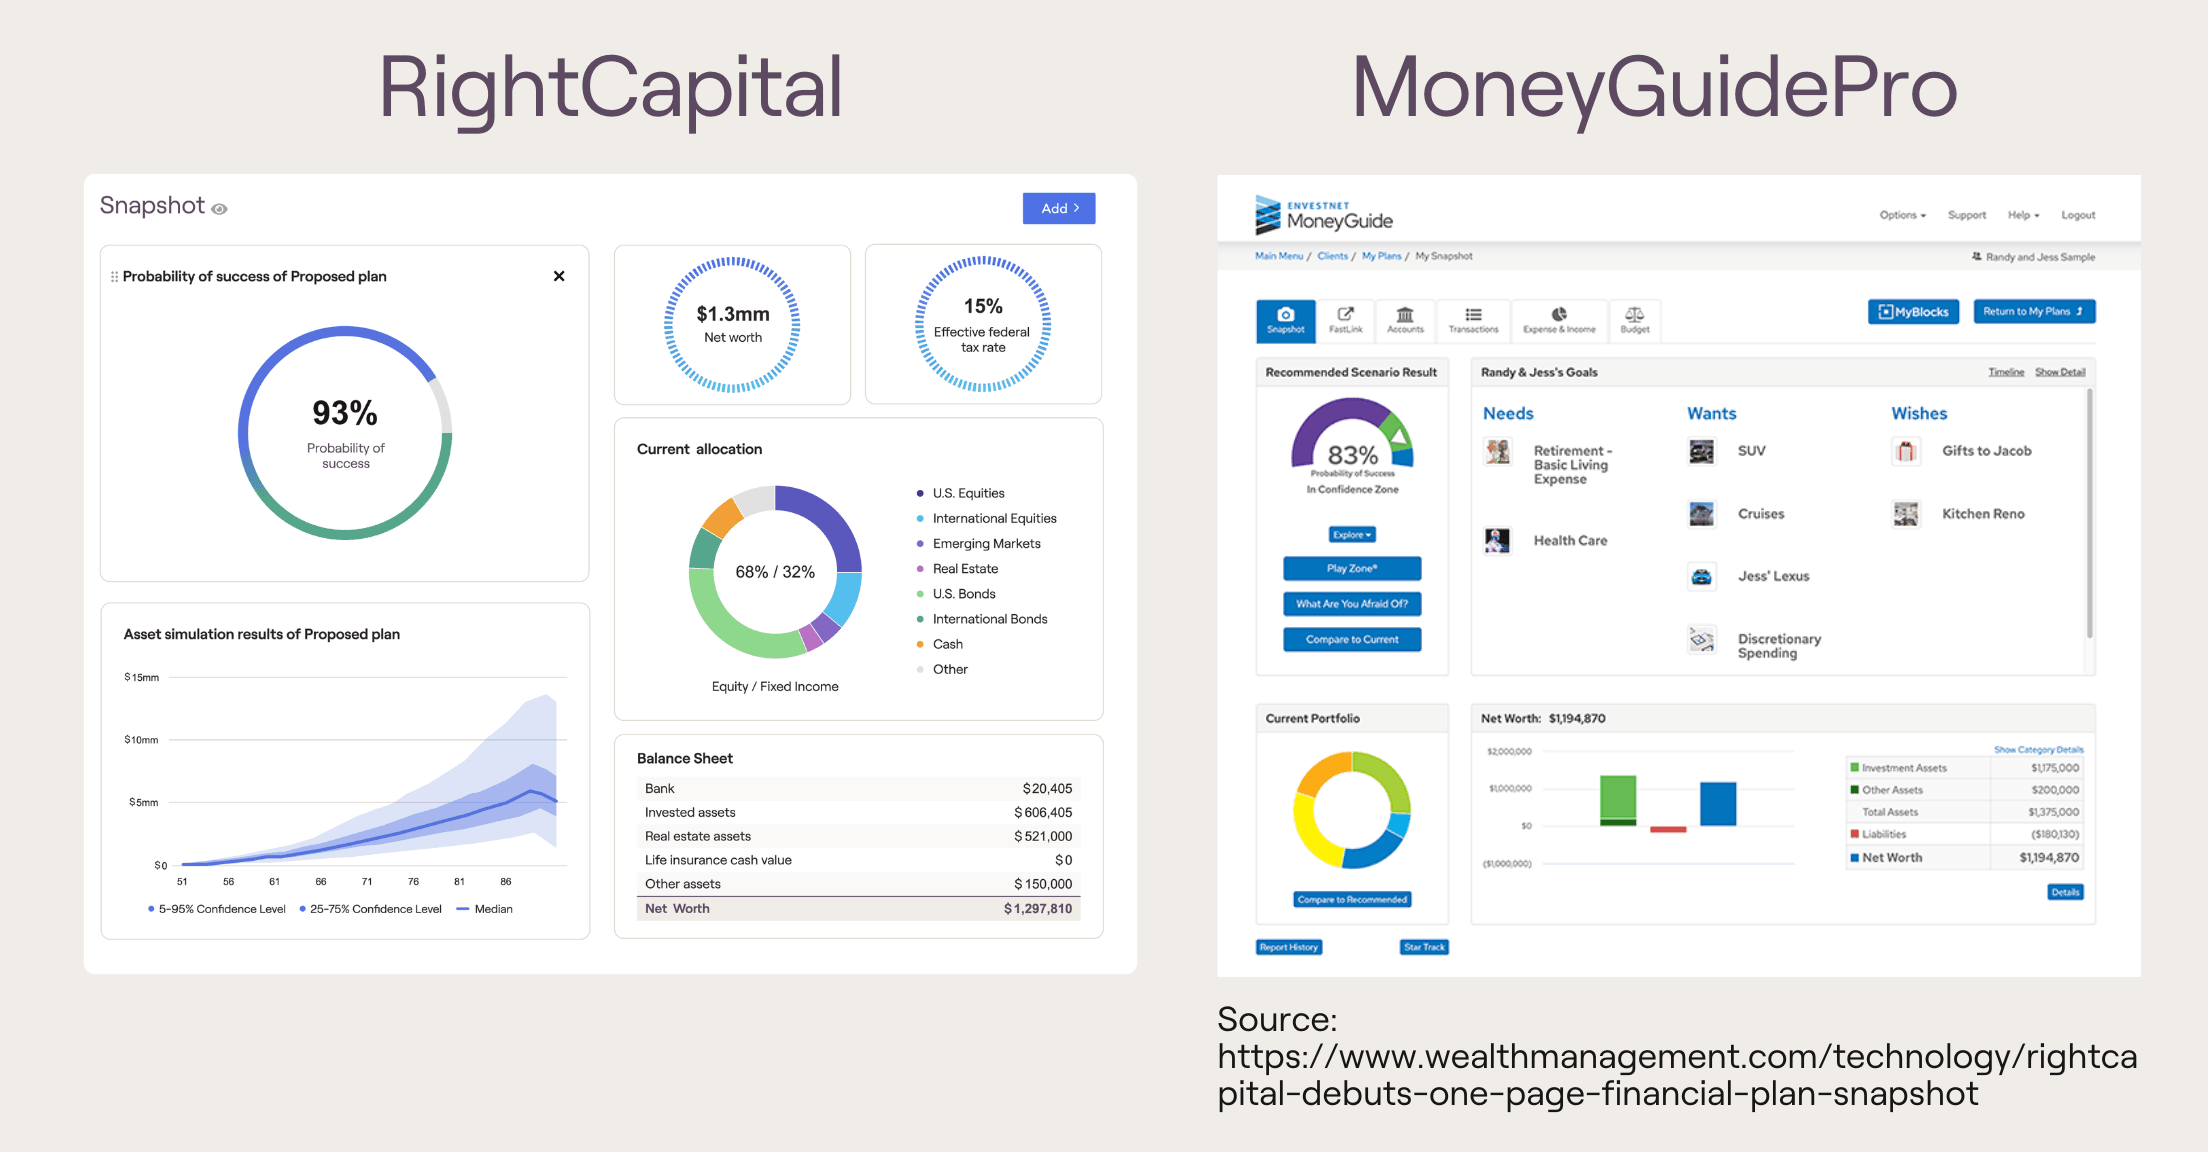 A side-by-side of one-page plans from both RightCapital and MoneyGuidePro